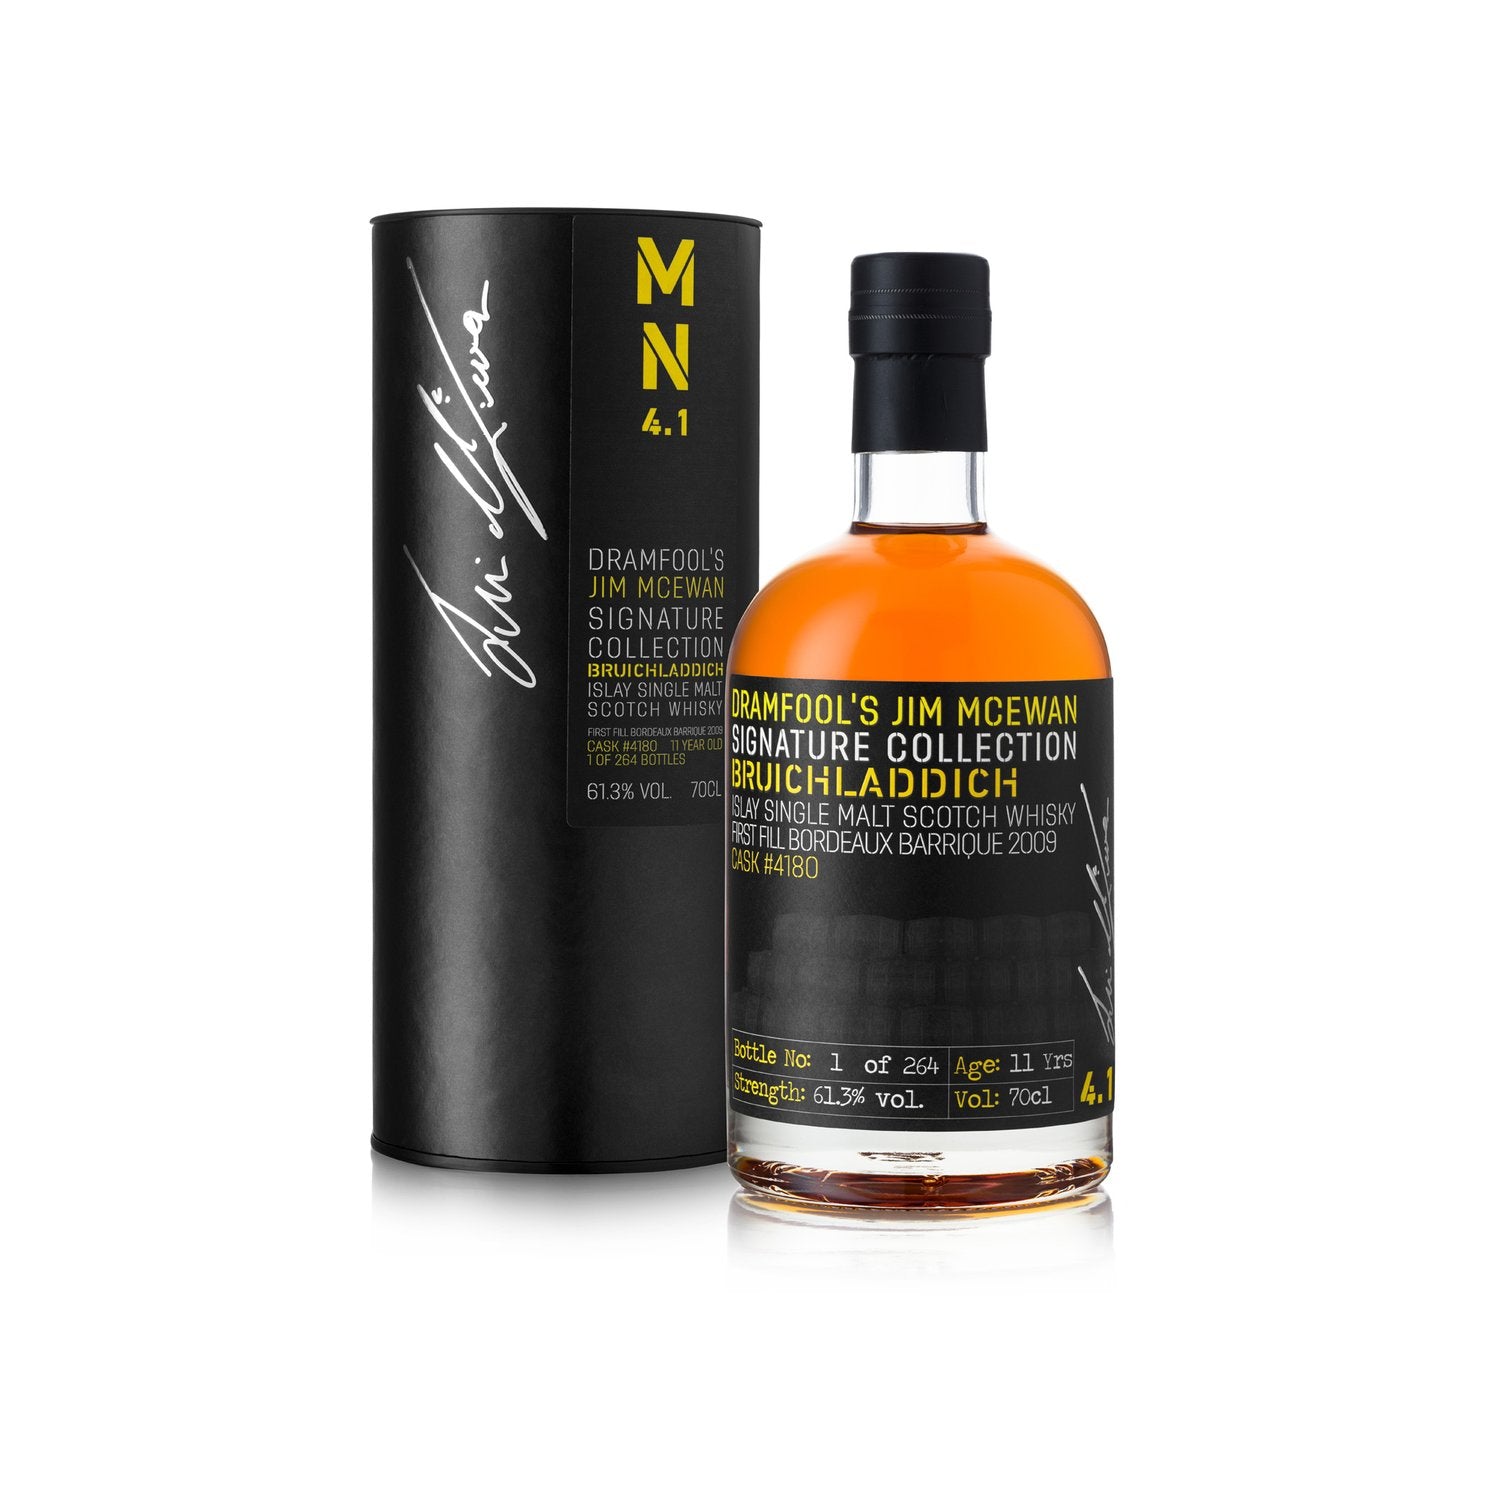 Jim McEwan Signature Collection 4.1, Bruichladdich 2009 11 years old First Fill Bordeaux barrique 2009 - Whiskylander